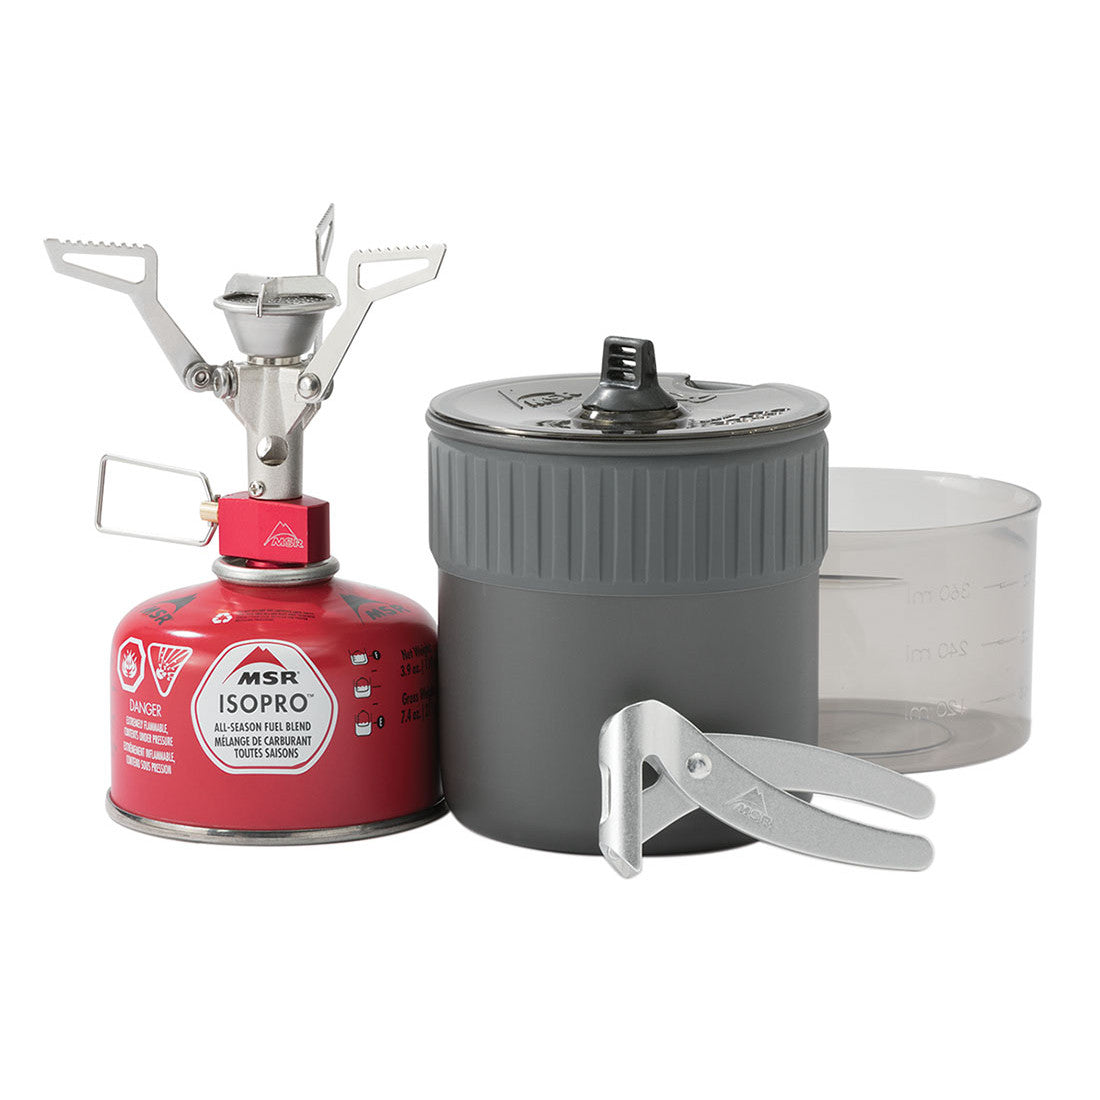 MSR PocketRocket 2 Mini Stove Kit with contents shown side by side